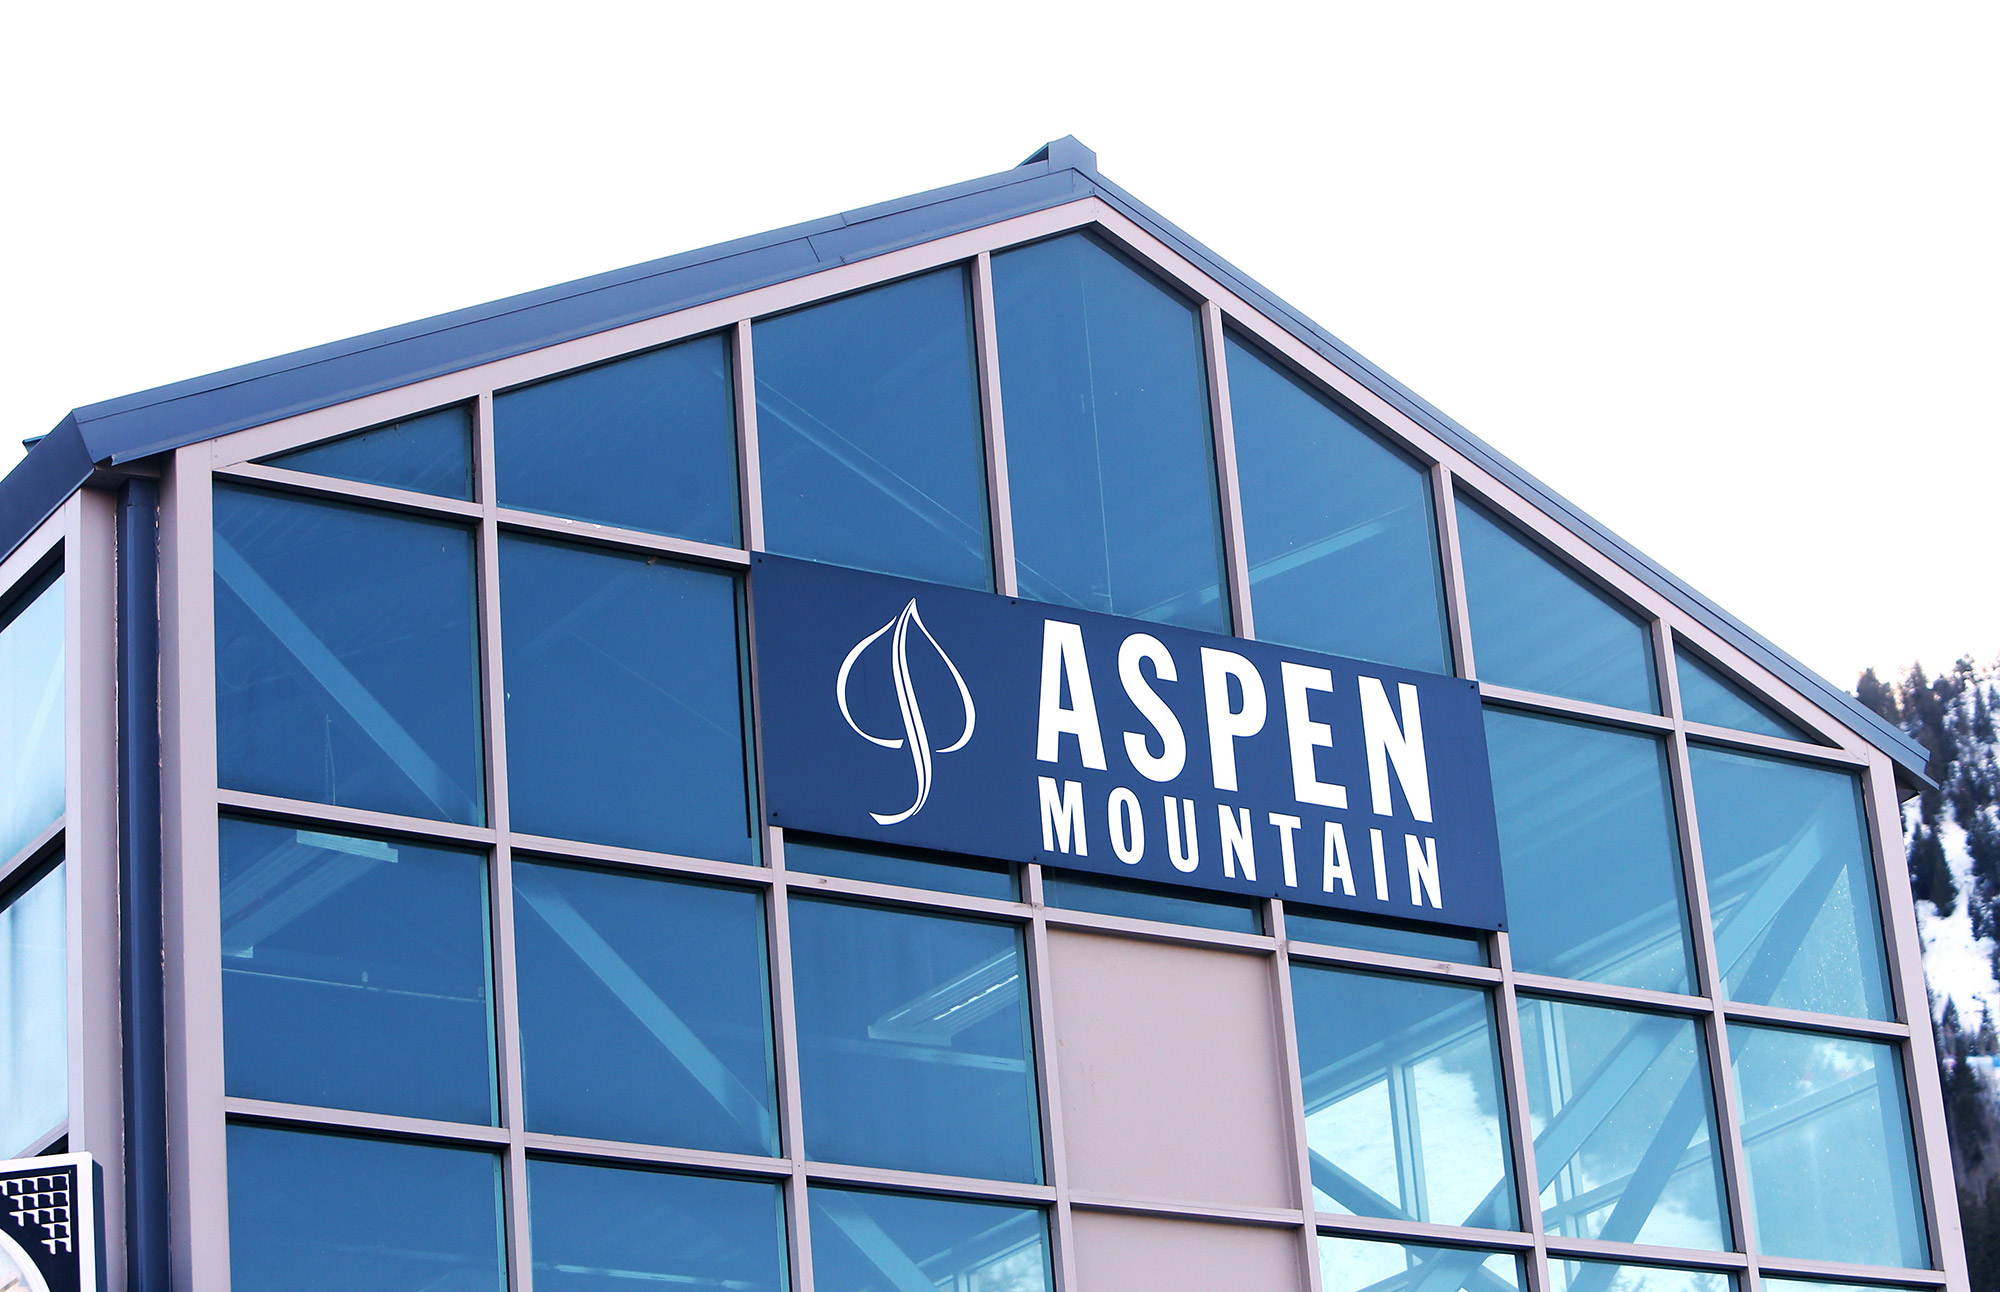 Aspen will host back-to-back events for masters this winter. GEPA